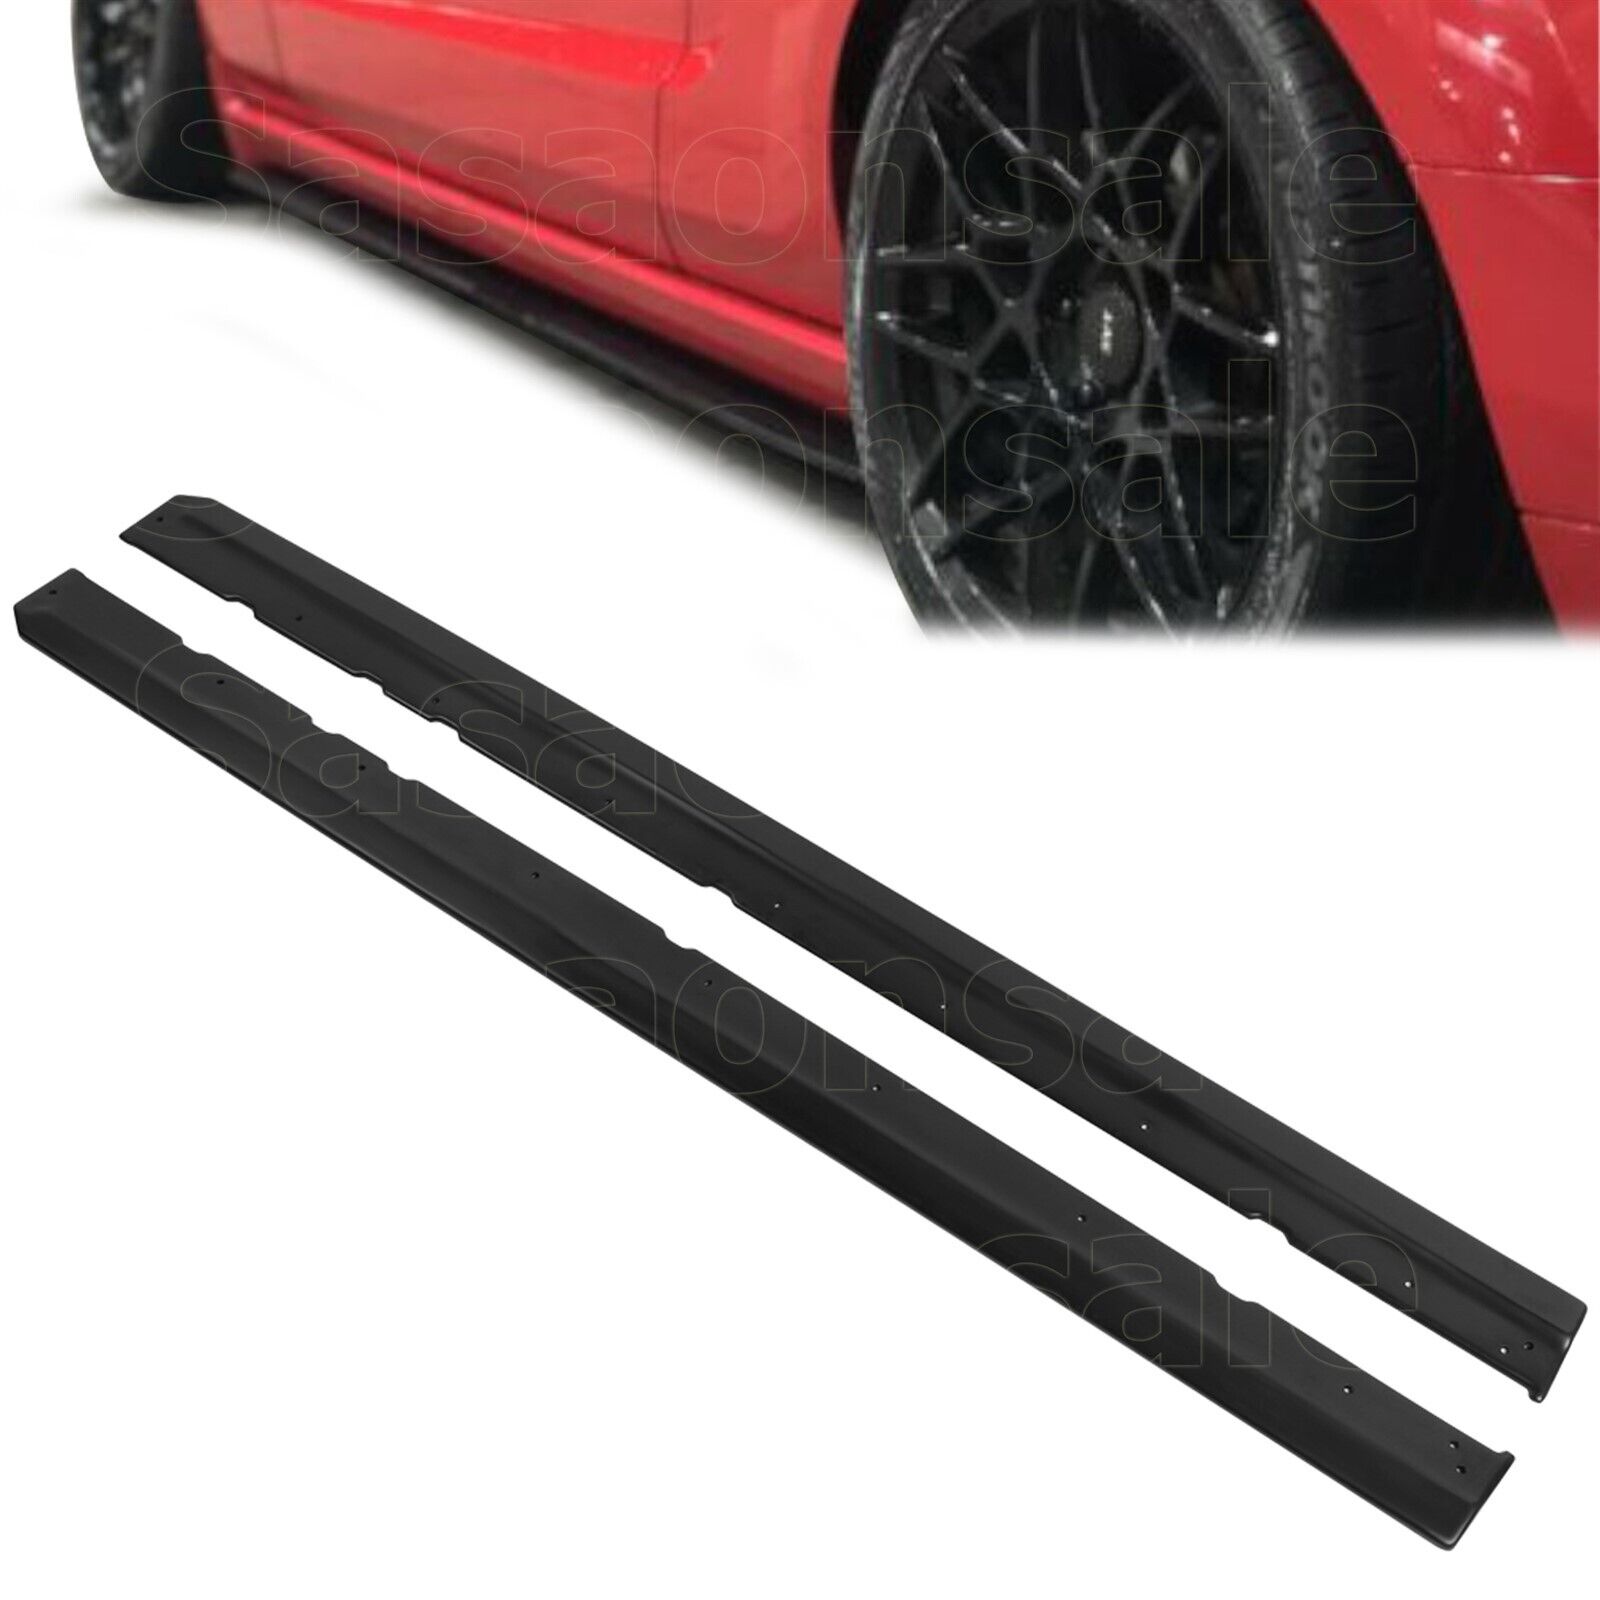 [SASA] Fit for 05-09 Ford Mustang PU Bumper Side Skirts Extension Lip Splitter